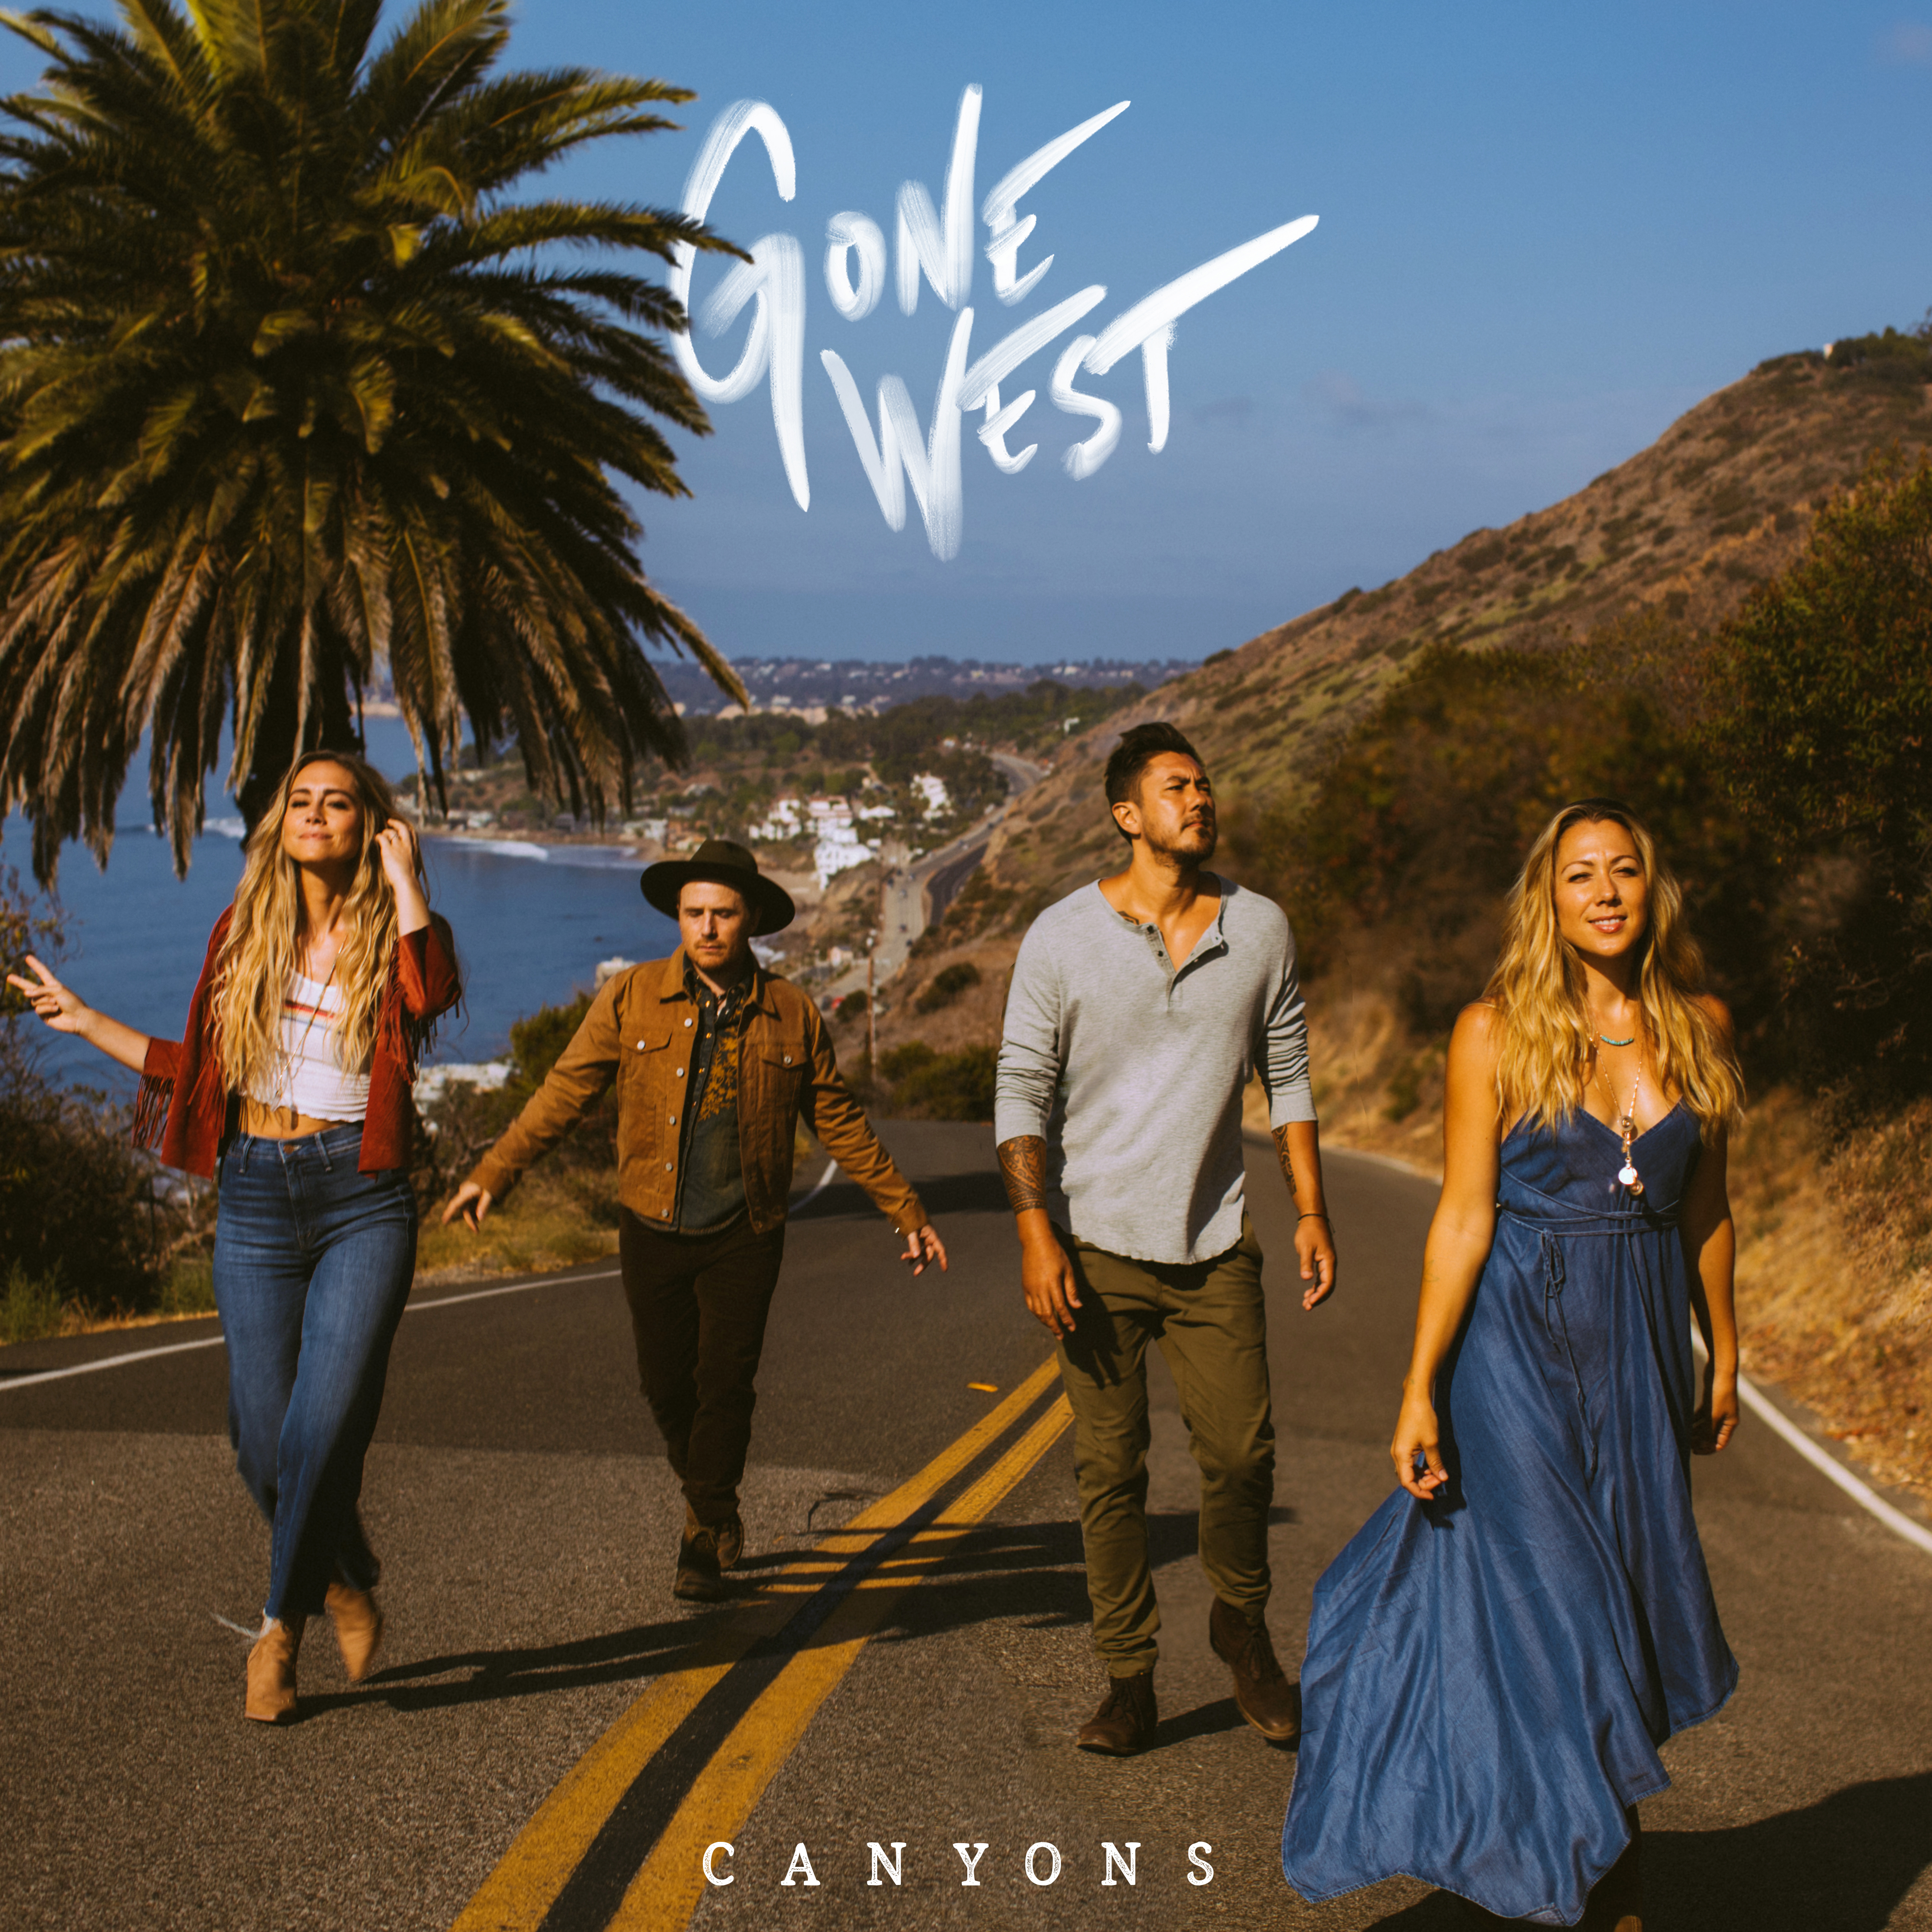 Gone West Announce Debut Album “Canyons” on TODAY Show